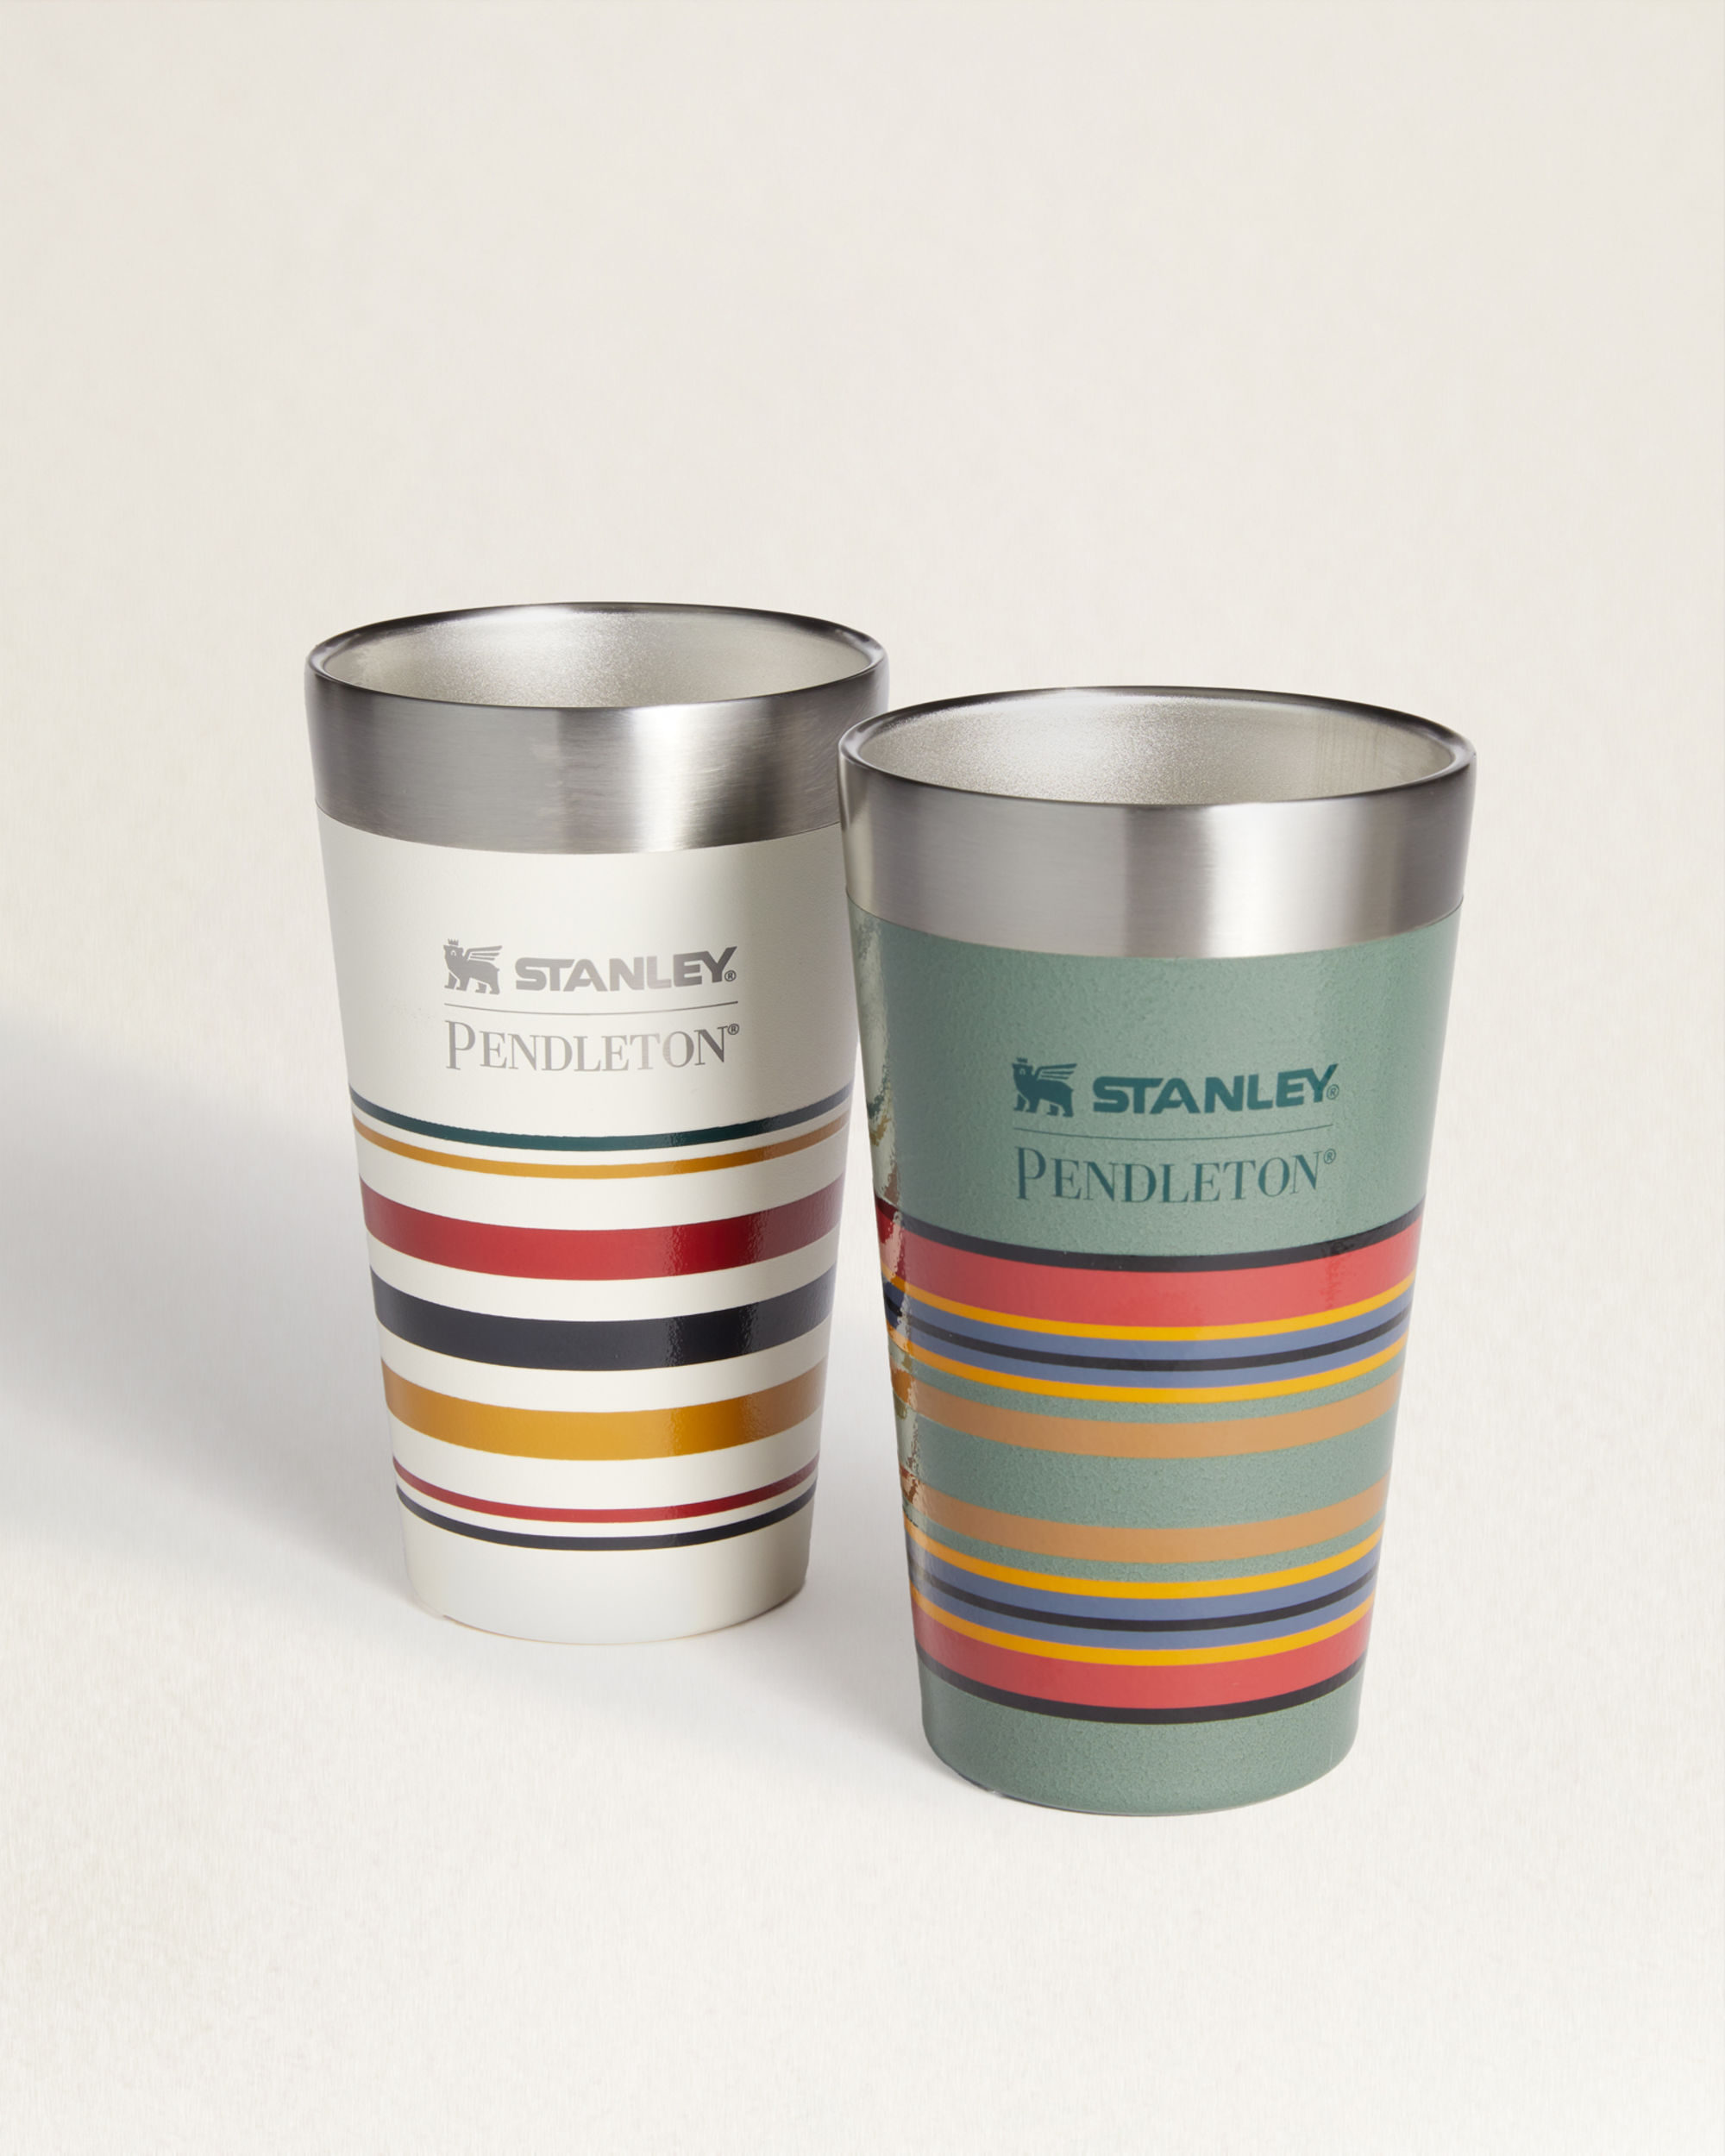 Stanley and Pendleton Just Launched the Perfect Drinkware Collab